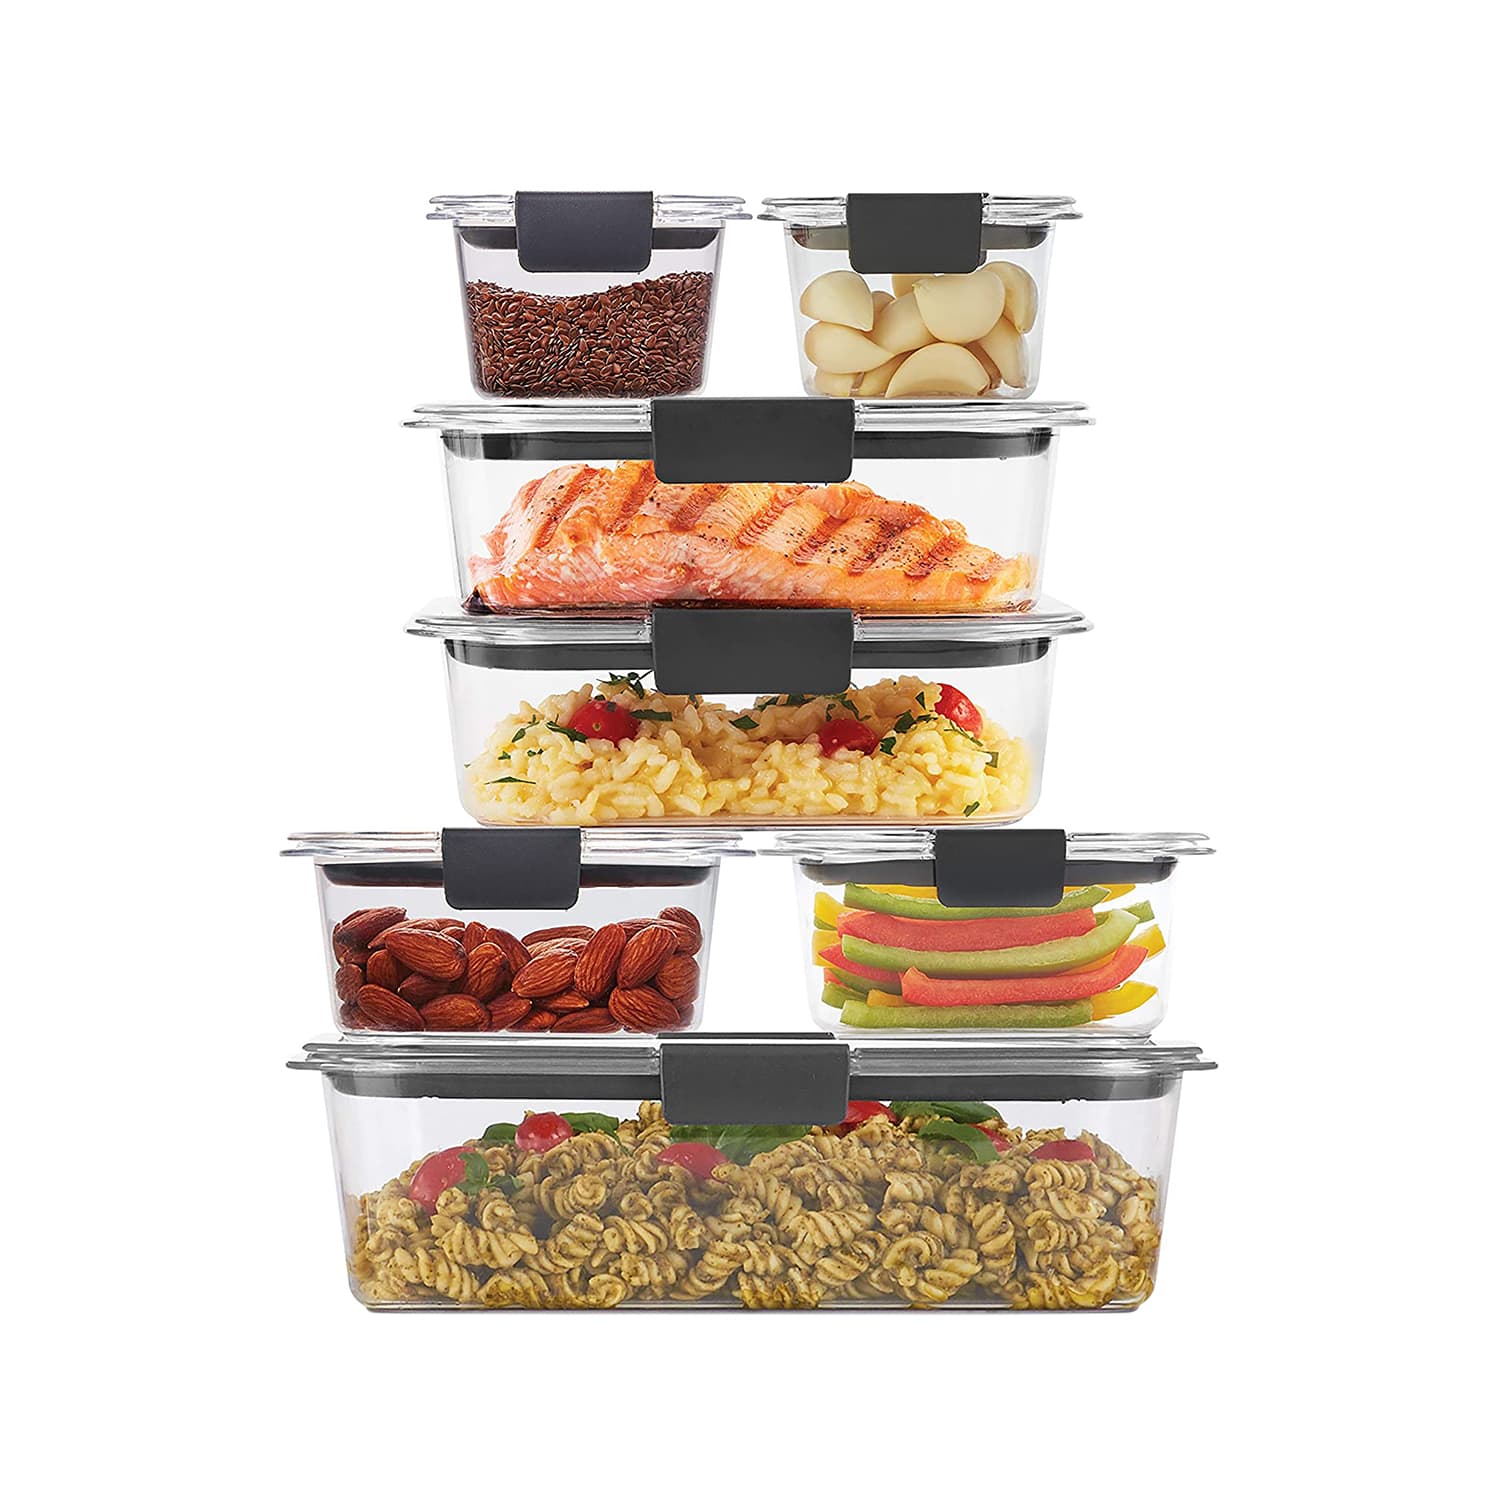 https://cdn.apartmenttherapy.info/image/upload/v1658851303/k/Photo/Lifestyle/2022-08-megatesting-best-lunch-containers/rubbermaid-brilliance-plastic.jpg